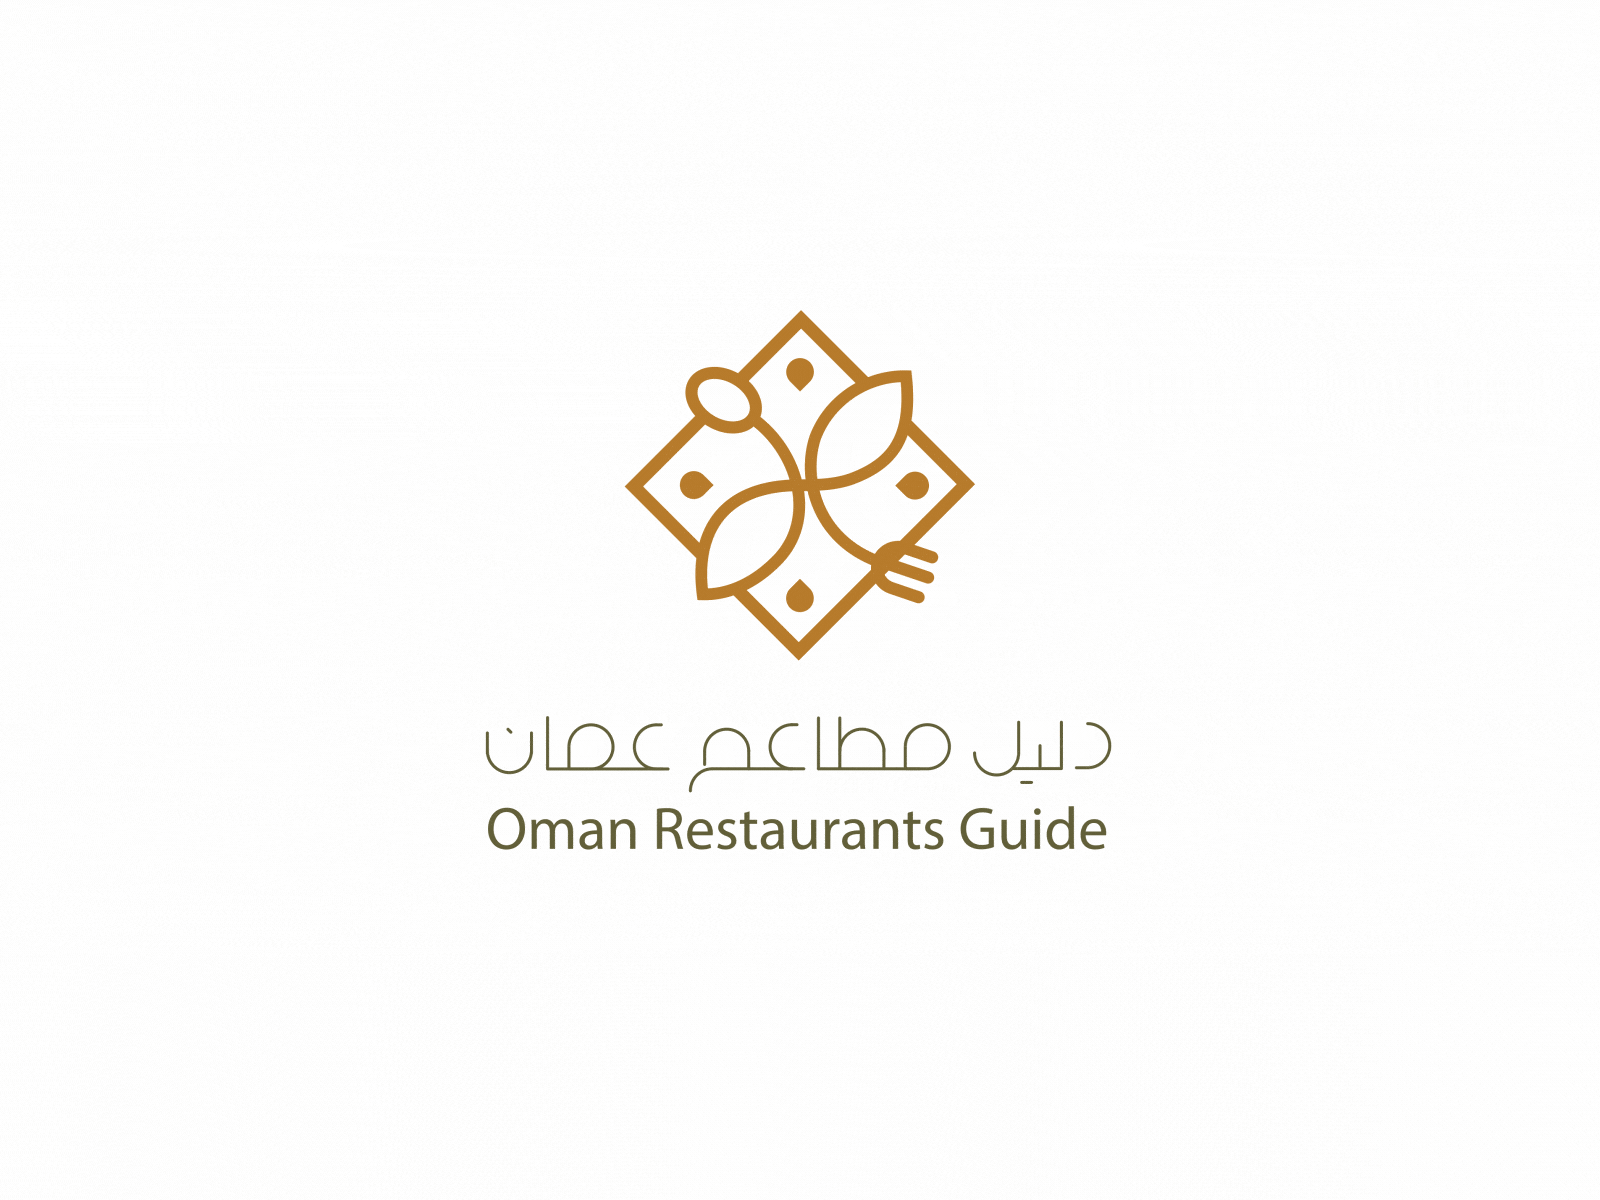 Oman restaurant guide - logo animation aftereffects animation behance bounce color creative design logo motion stroke